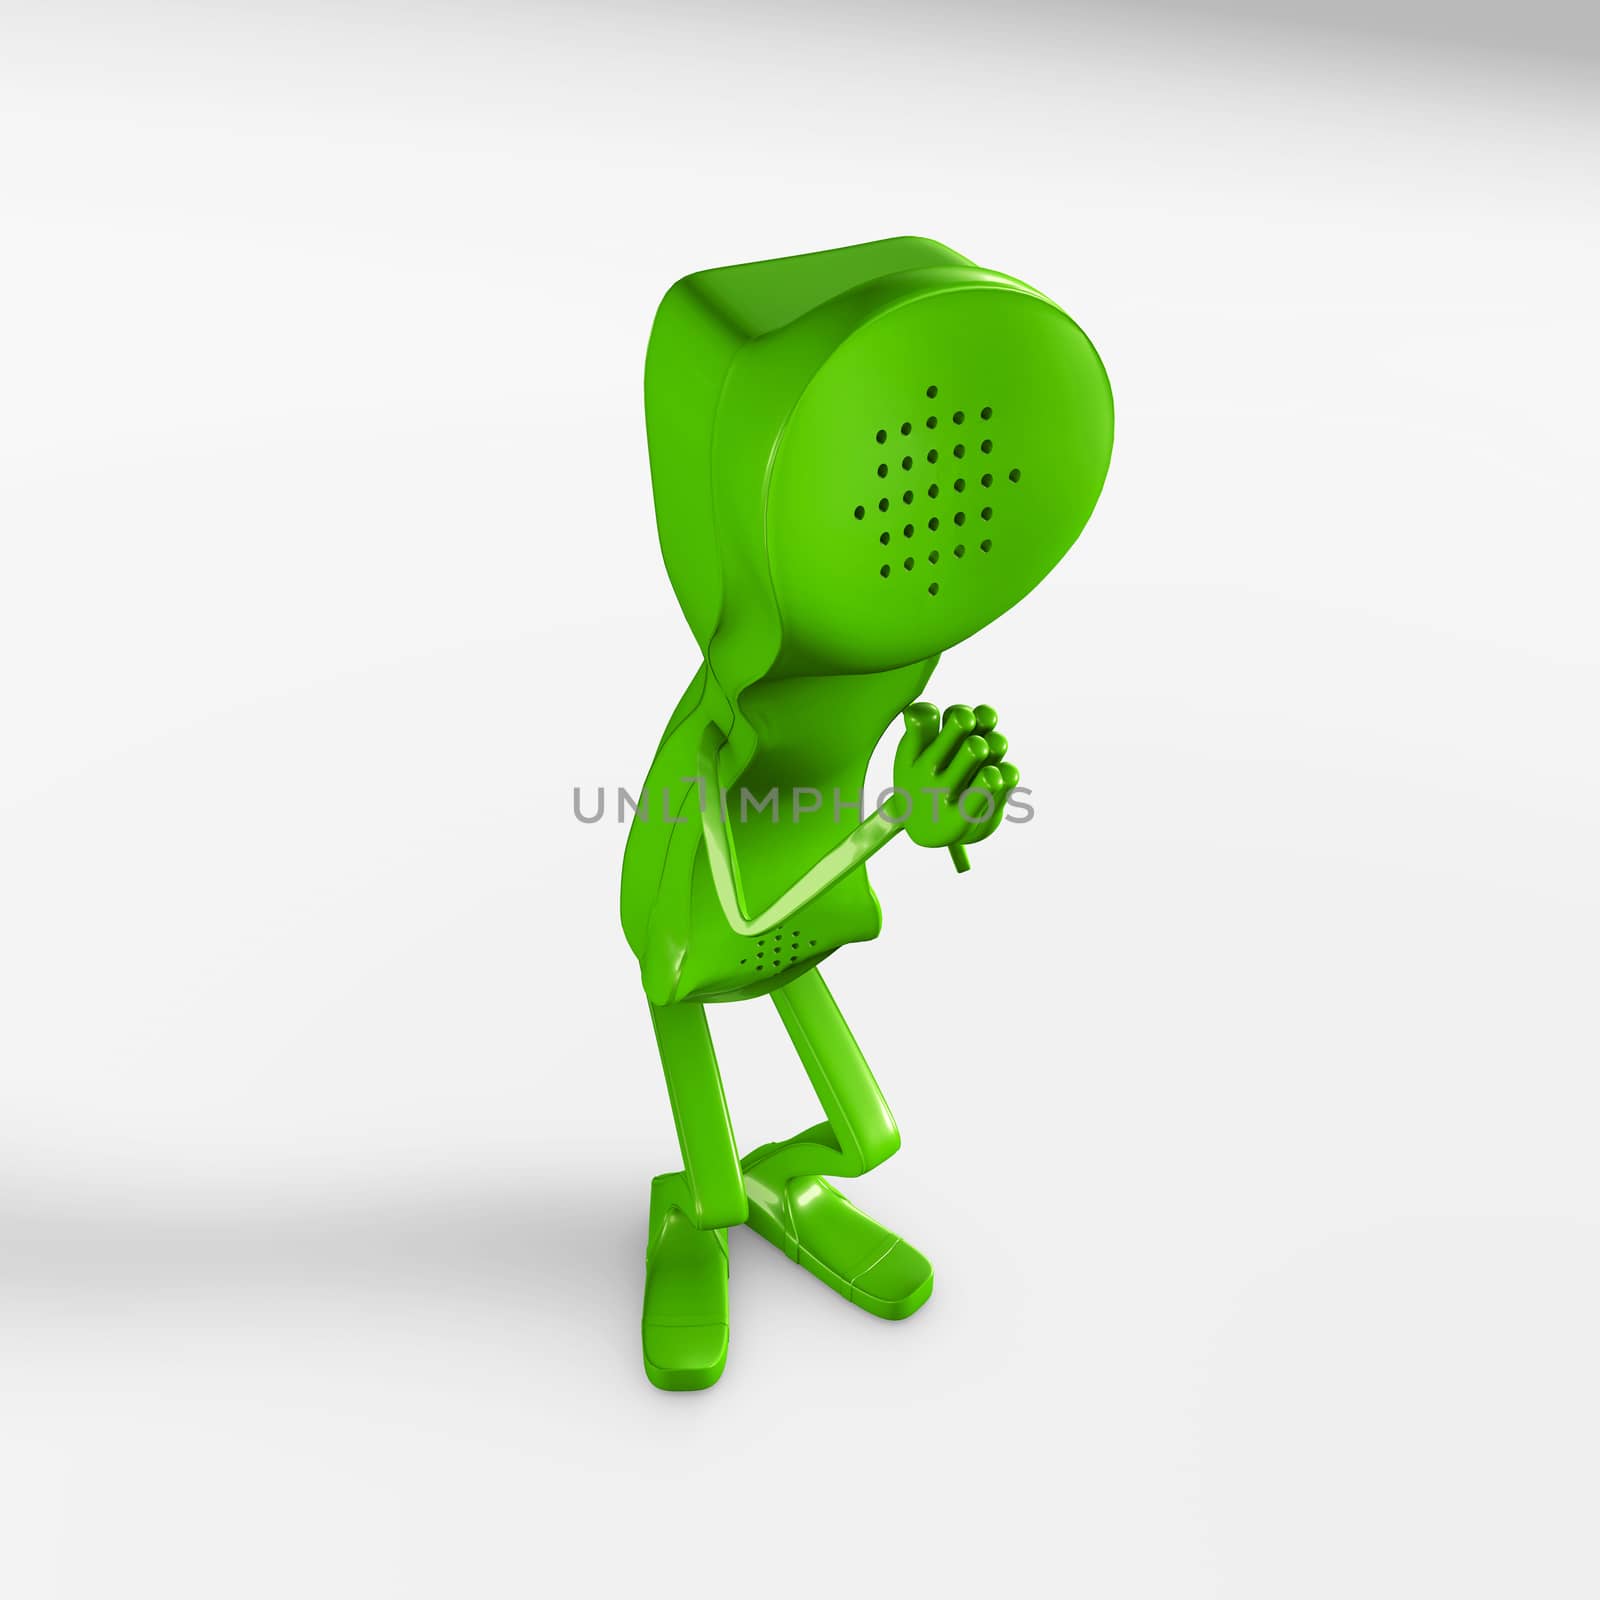 3d rendering of a telephone character praying by F1b0nacci